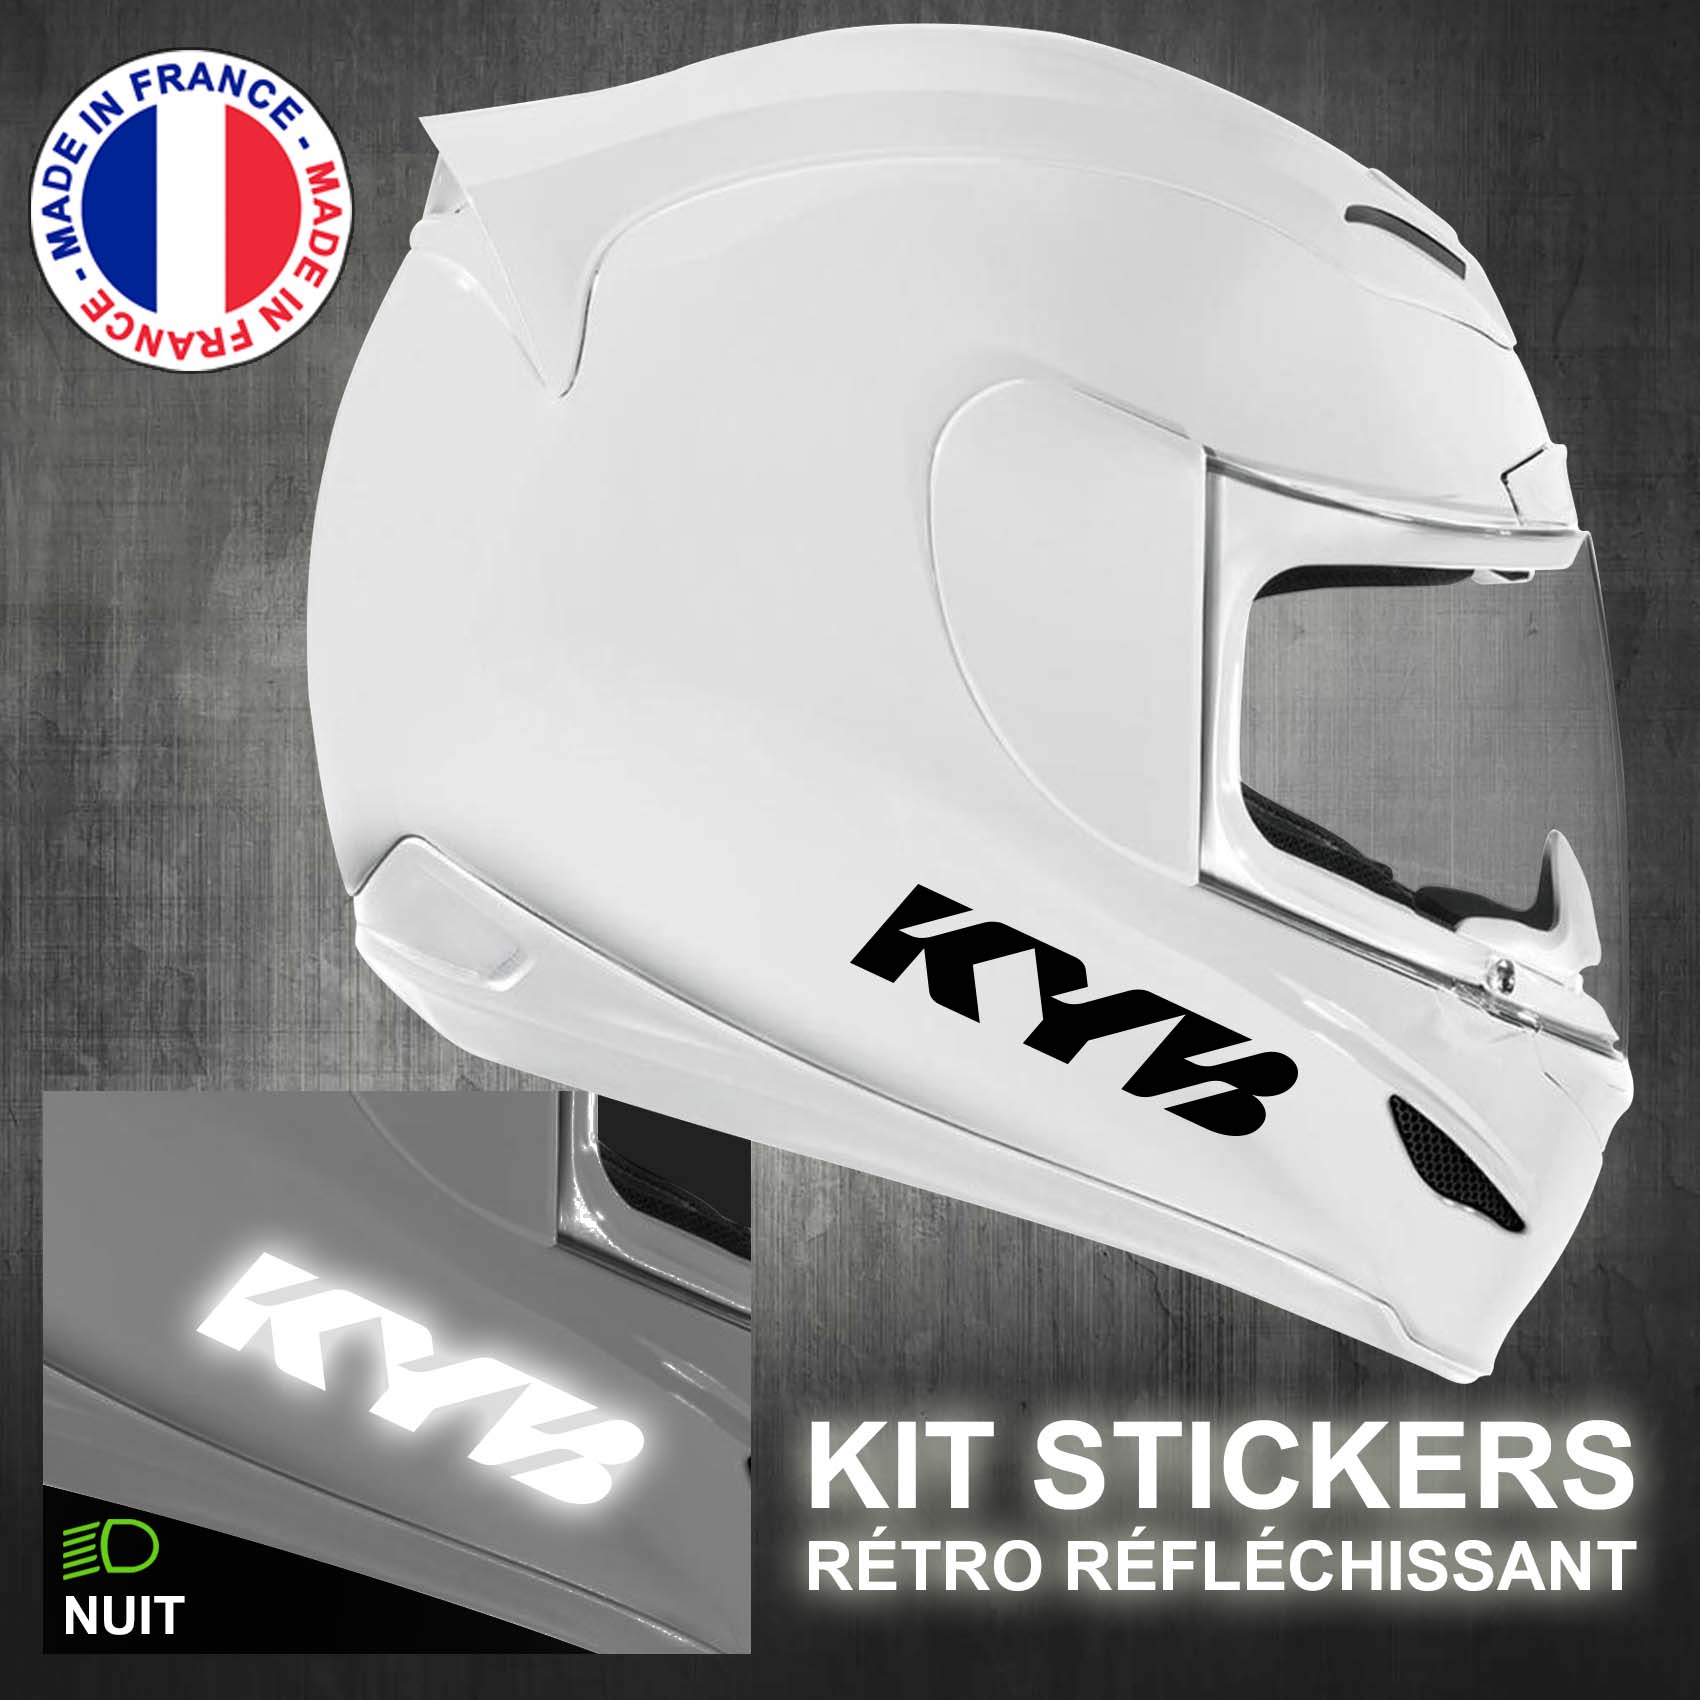 stickers-casque-moto-kayaba-kyb-ref1-retro-reflechissant-autocollant-moto-velo-tuning-racing-route-sticker-casques-adhesif-scooter-nuit-securite-decals-personnalise-personnalisable-min